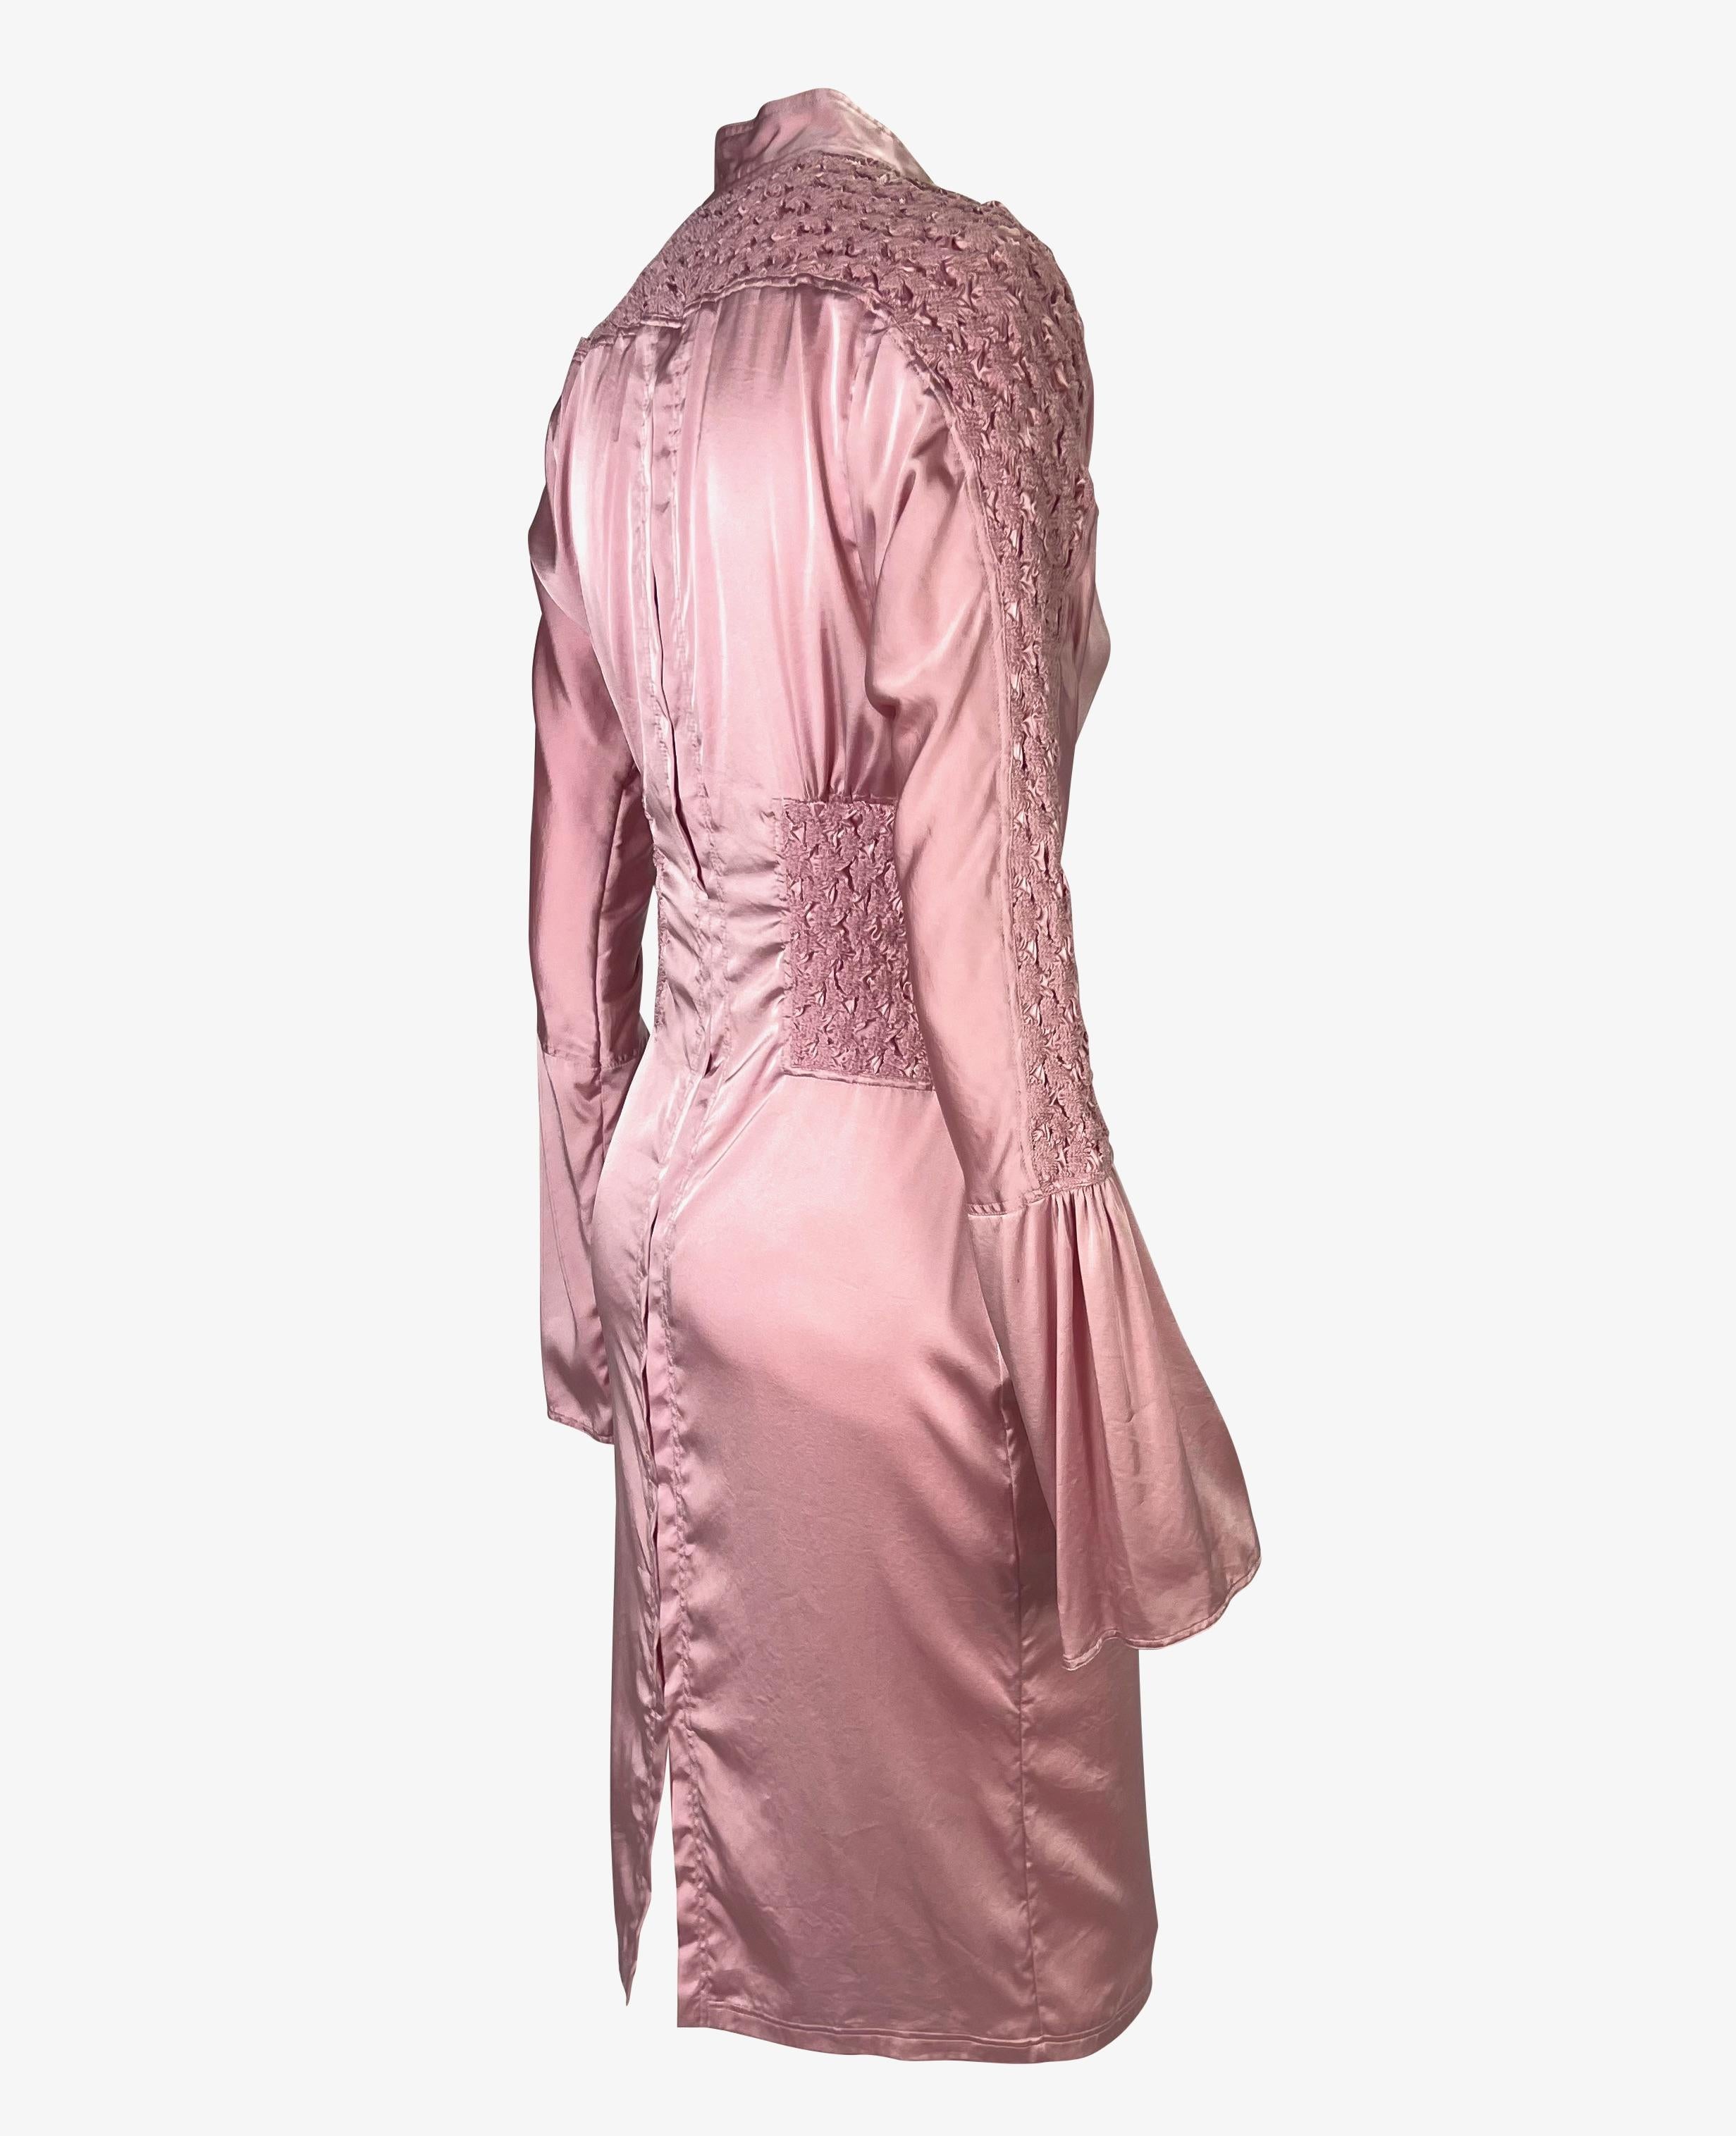 Brown S/S 2004 Gucci by Tom Ford Ruched Pink Satin Rhinestone Brooch Dress For Sale